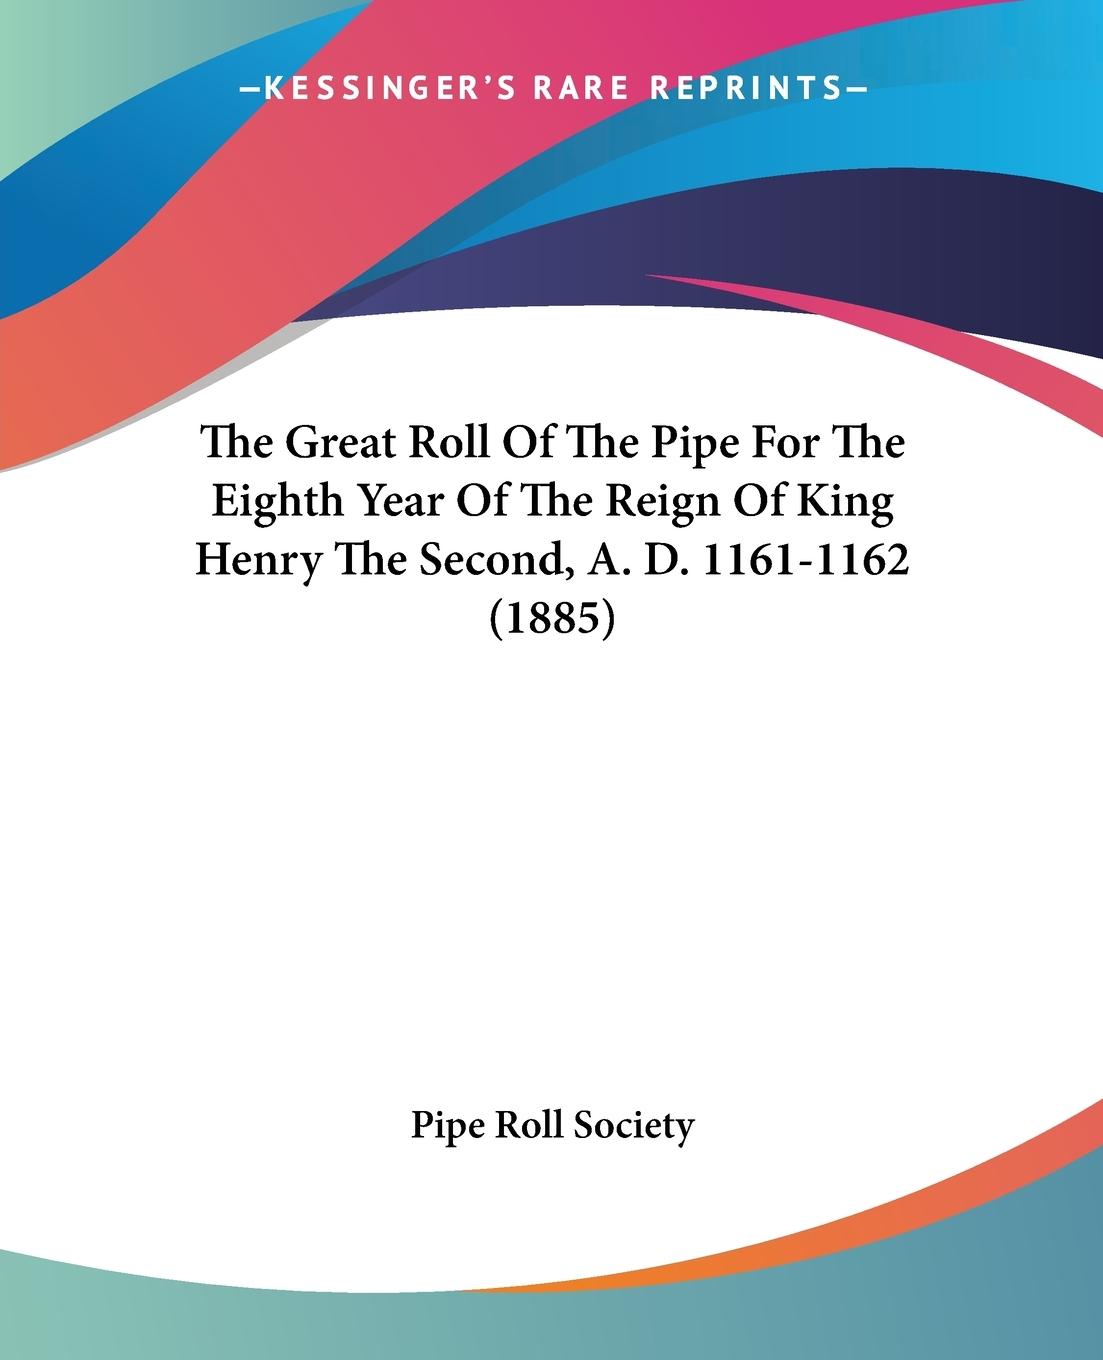 The Great Roll Of The Pipe For The Eighth Year Of The Reign Of King Henry The Second, A. D. 1161-1162 (1885) - Pipe Roll Society